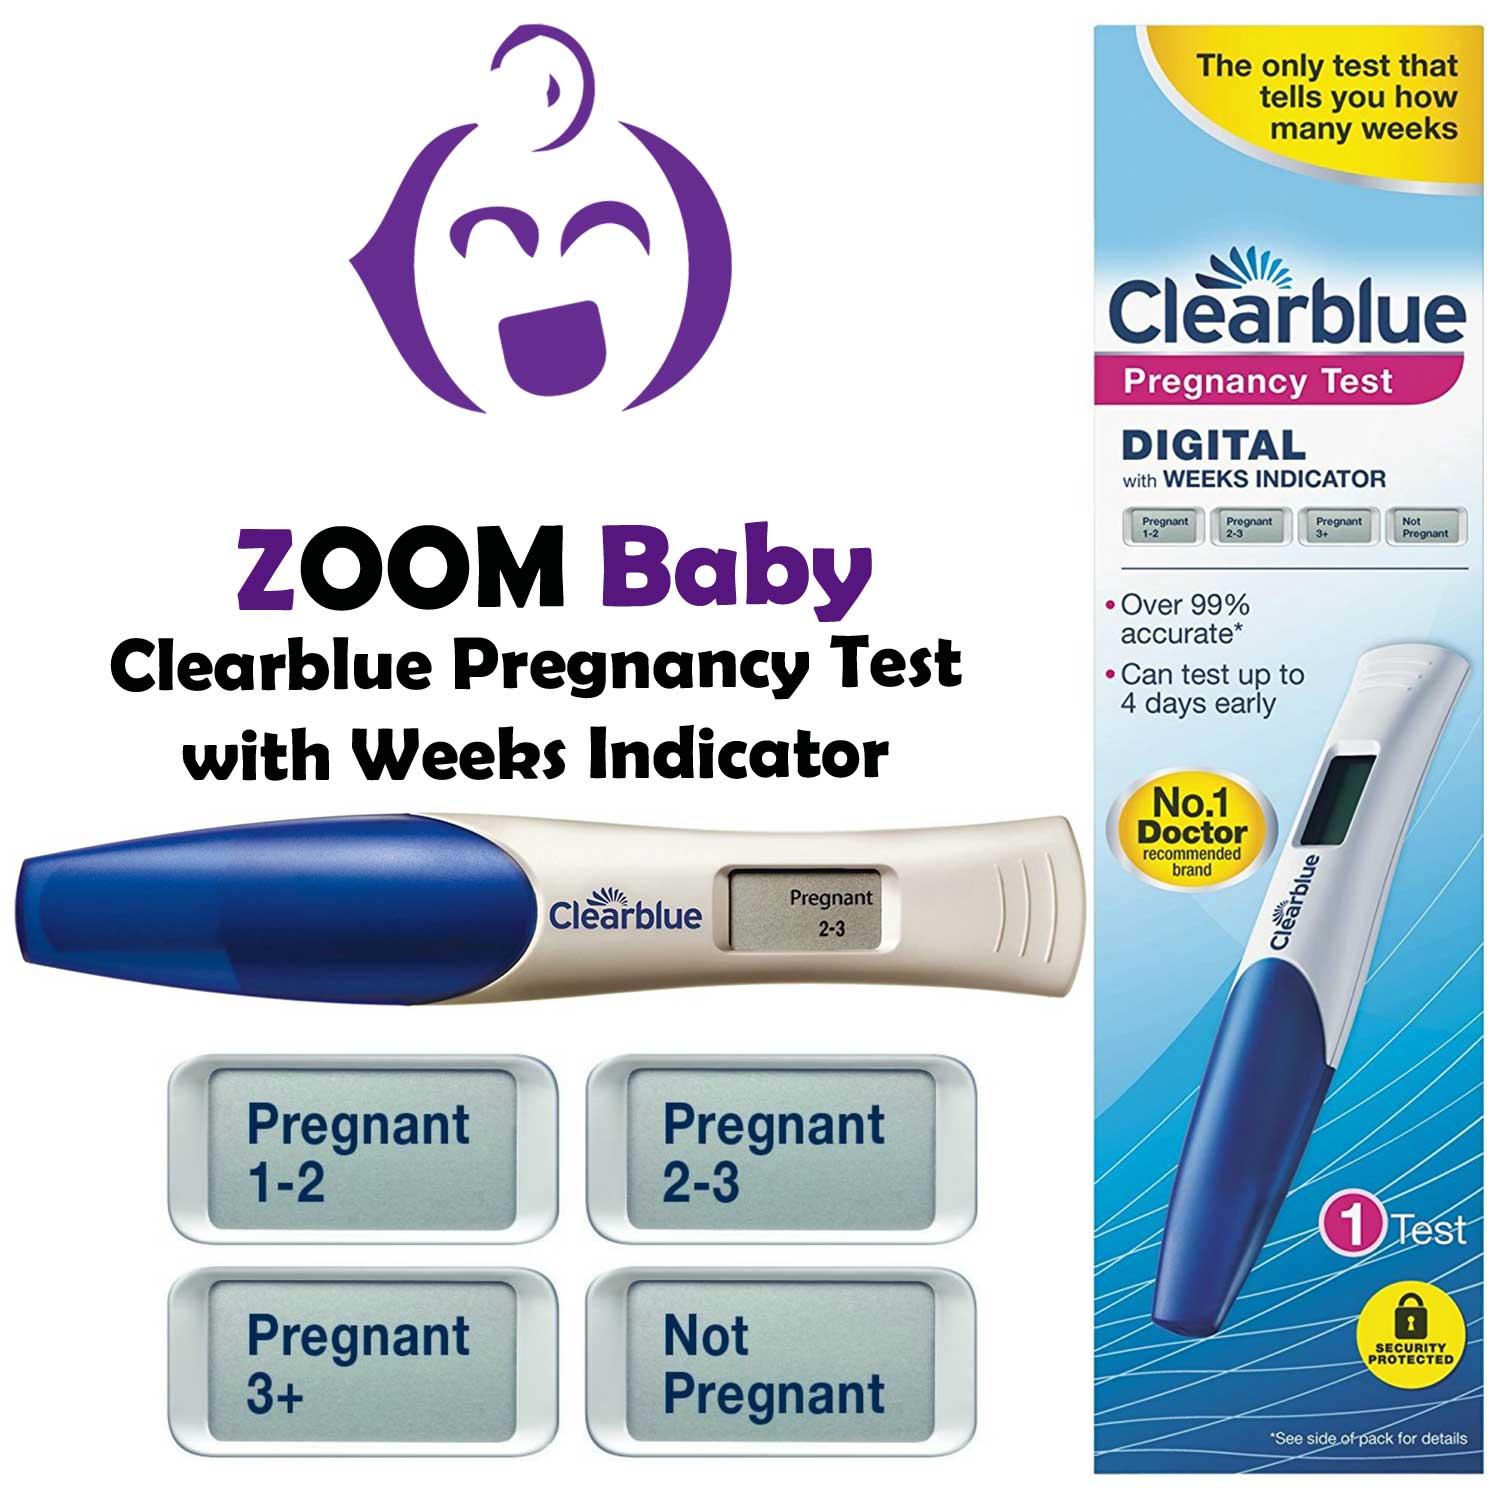 Clearblue Digital Pregnancy Test with Weeks Indicator | Zoom Health